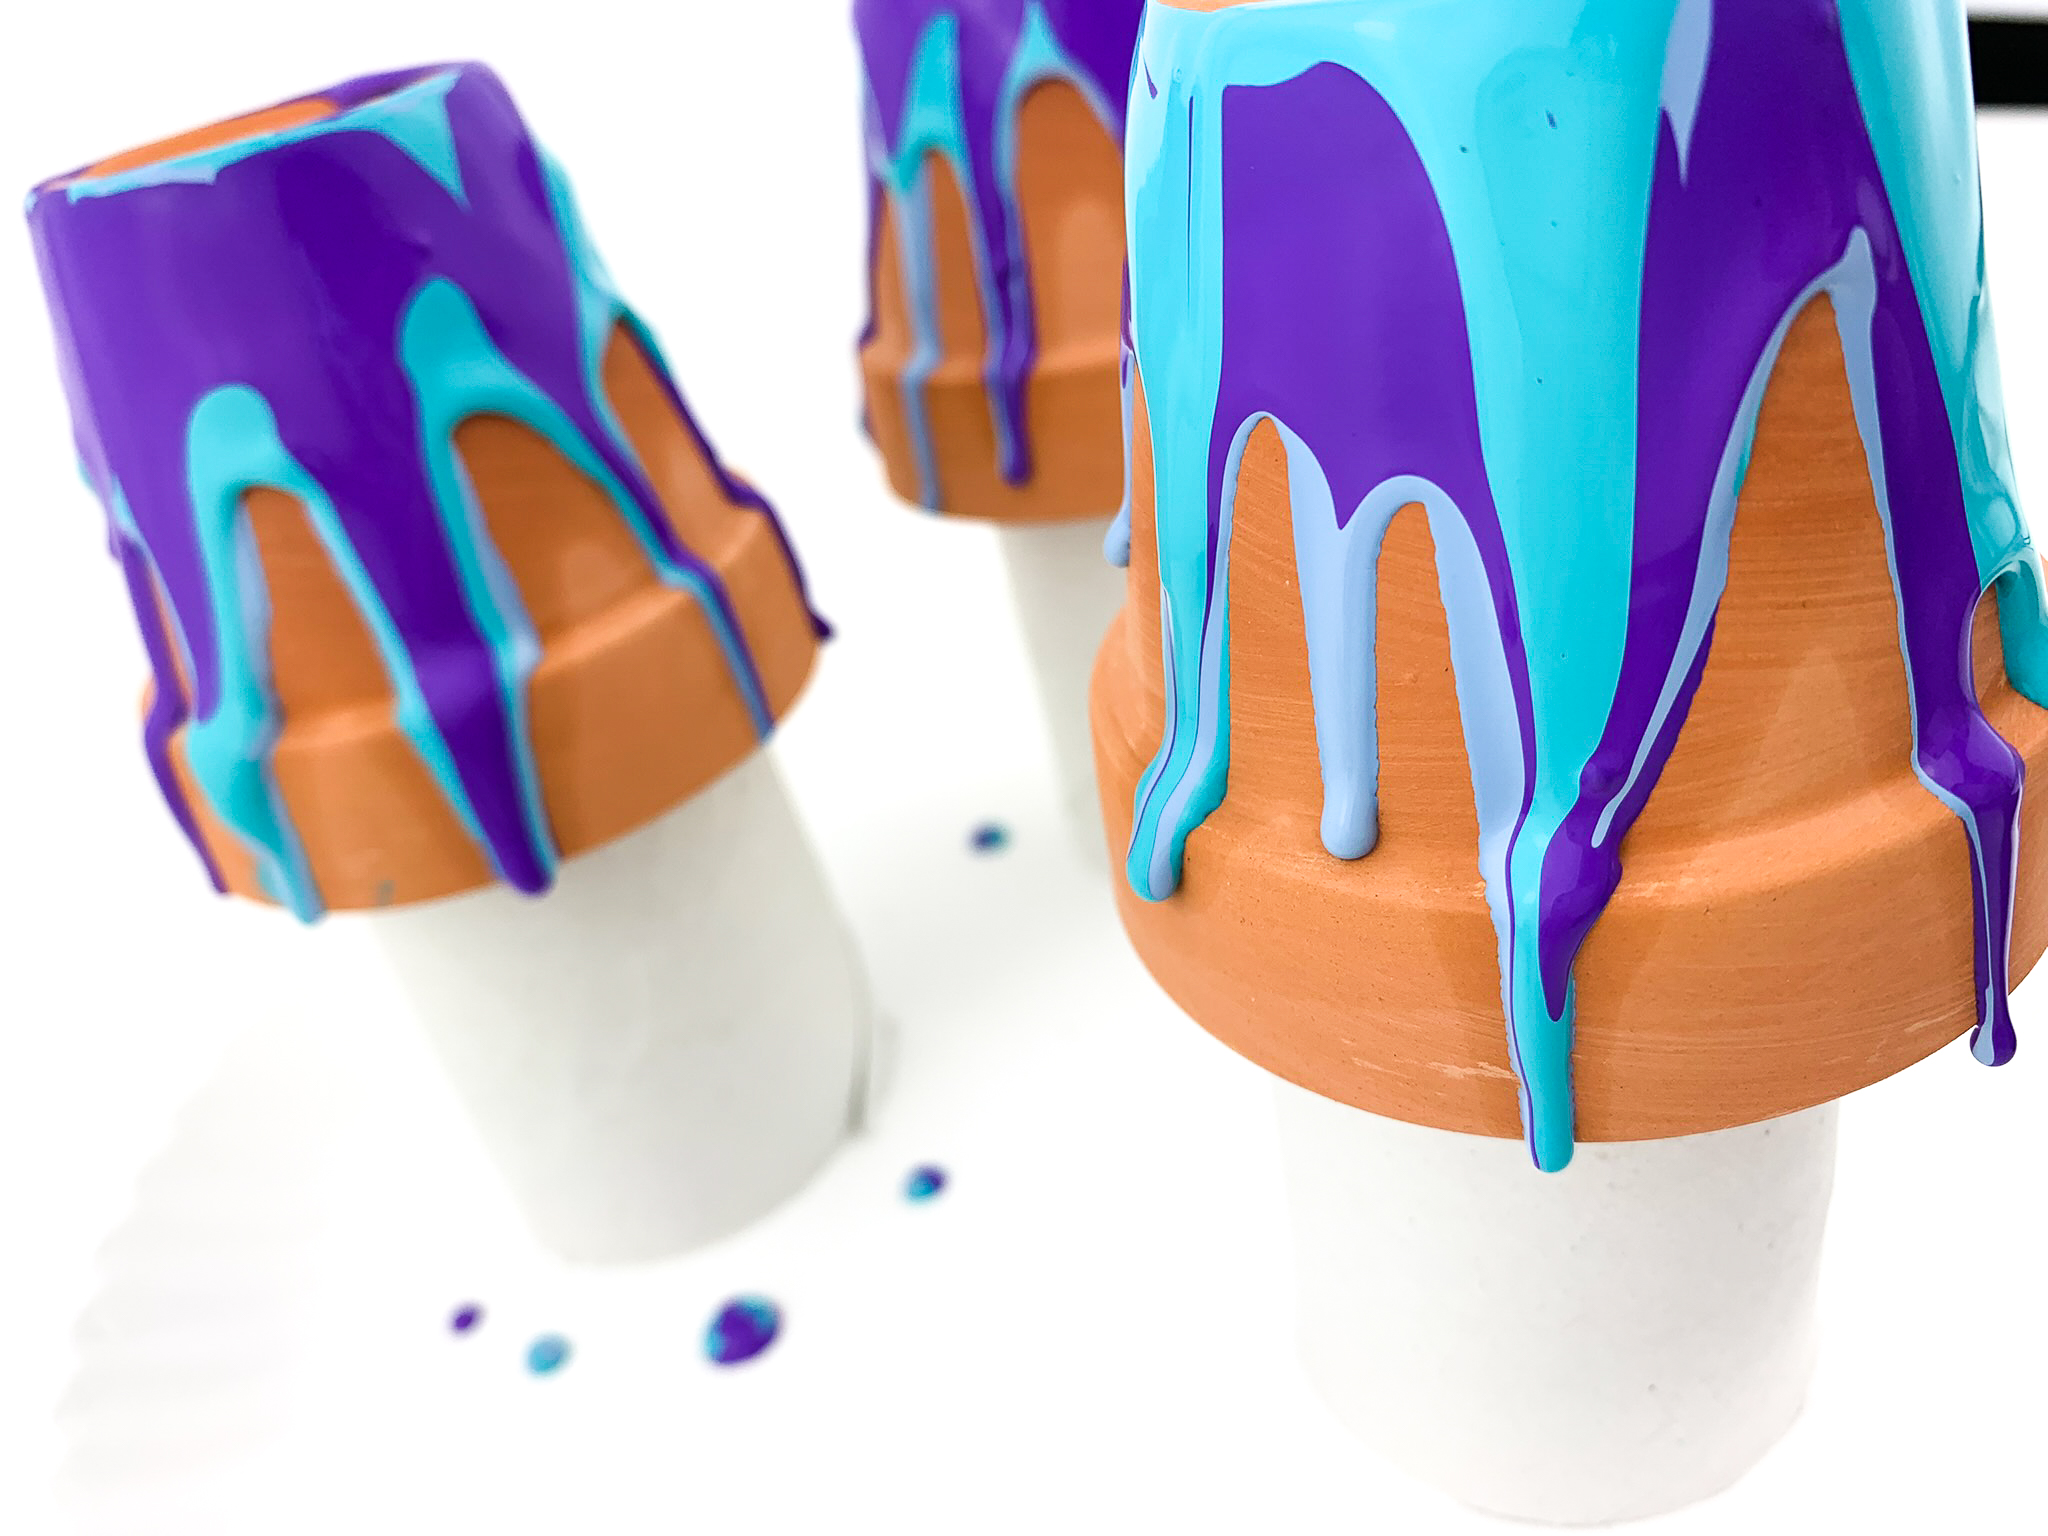 3 mini clay pots upside down, sitting on toilet paper rolls. Blue and purple paint dripping down the sides.